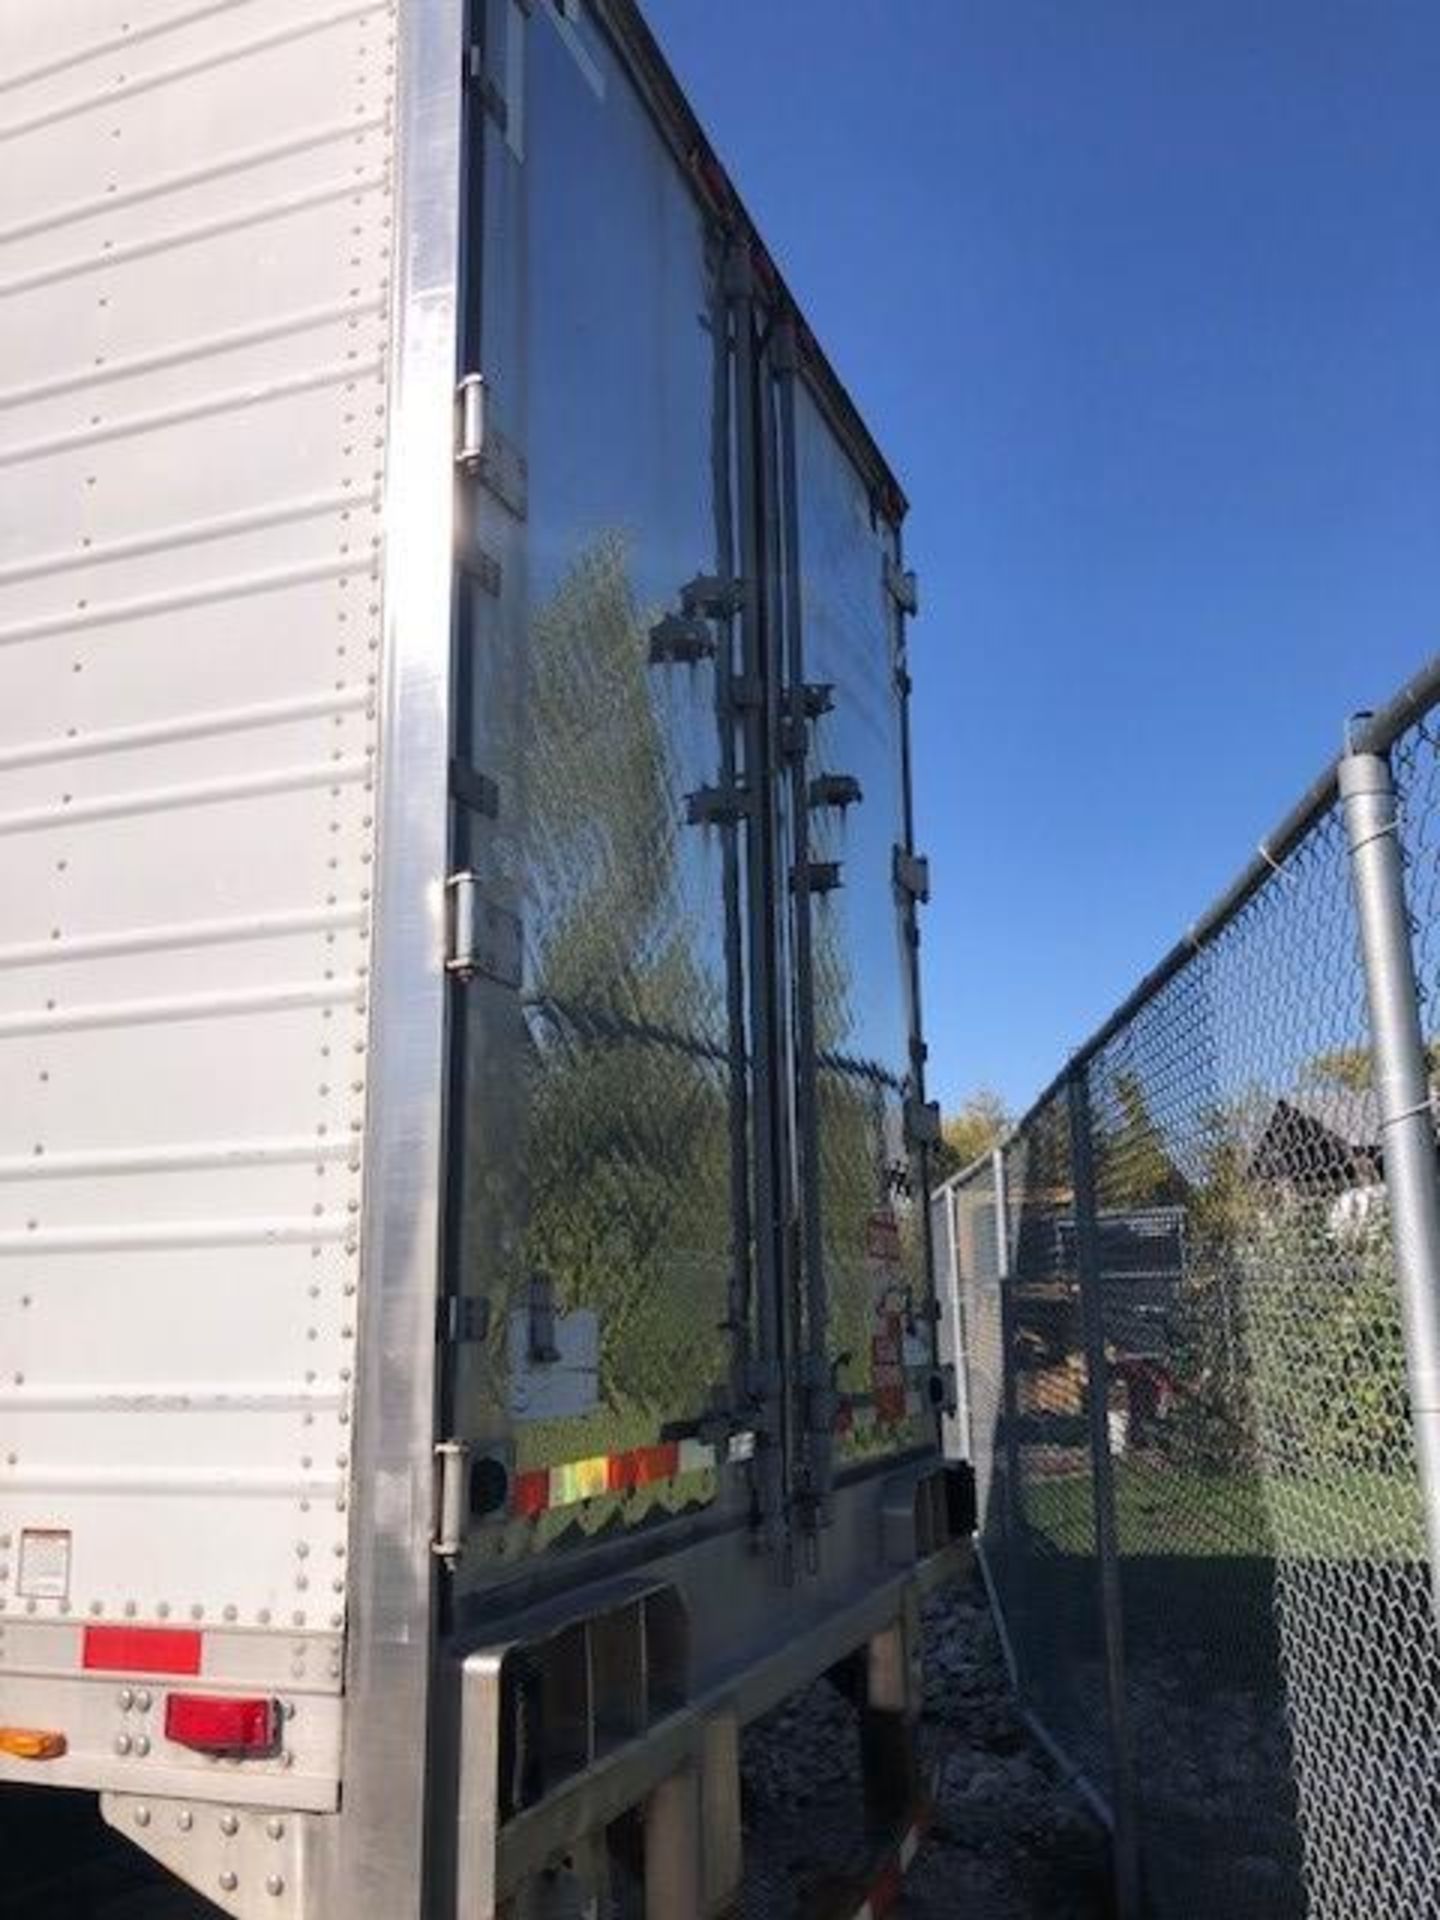 2009 Great Dane Refrigerated Trailer, VIN#: 1GRAA0626AW702306, M/N SUP-111411G53, with Carrier Refer - Image 21 of 21